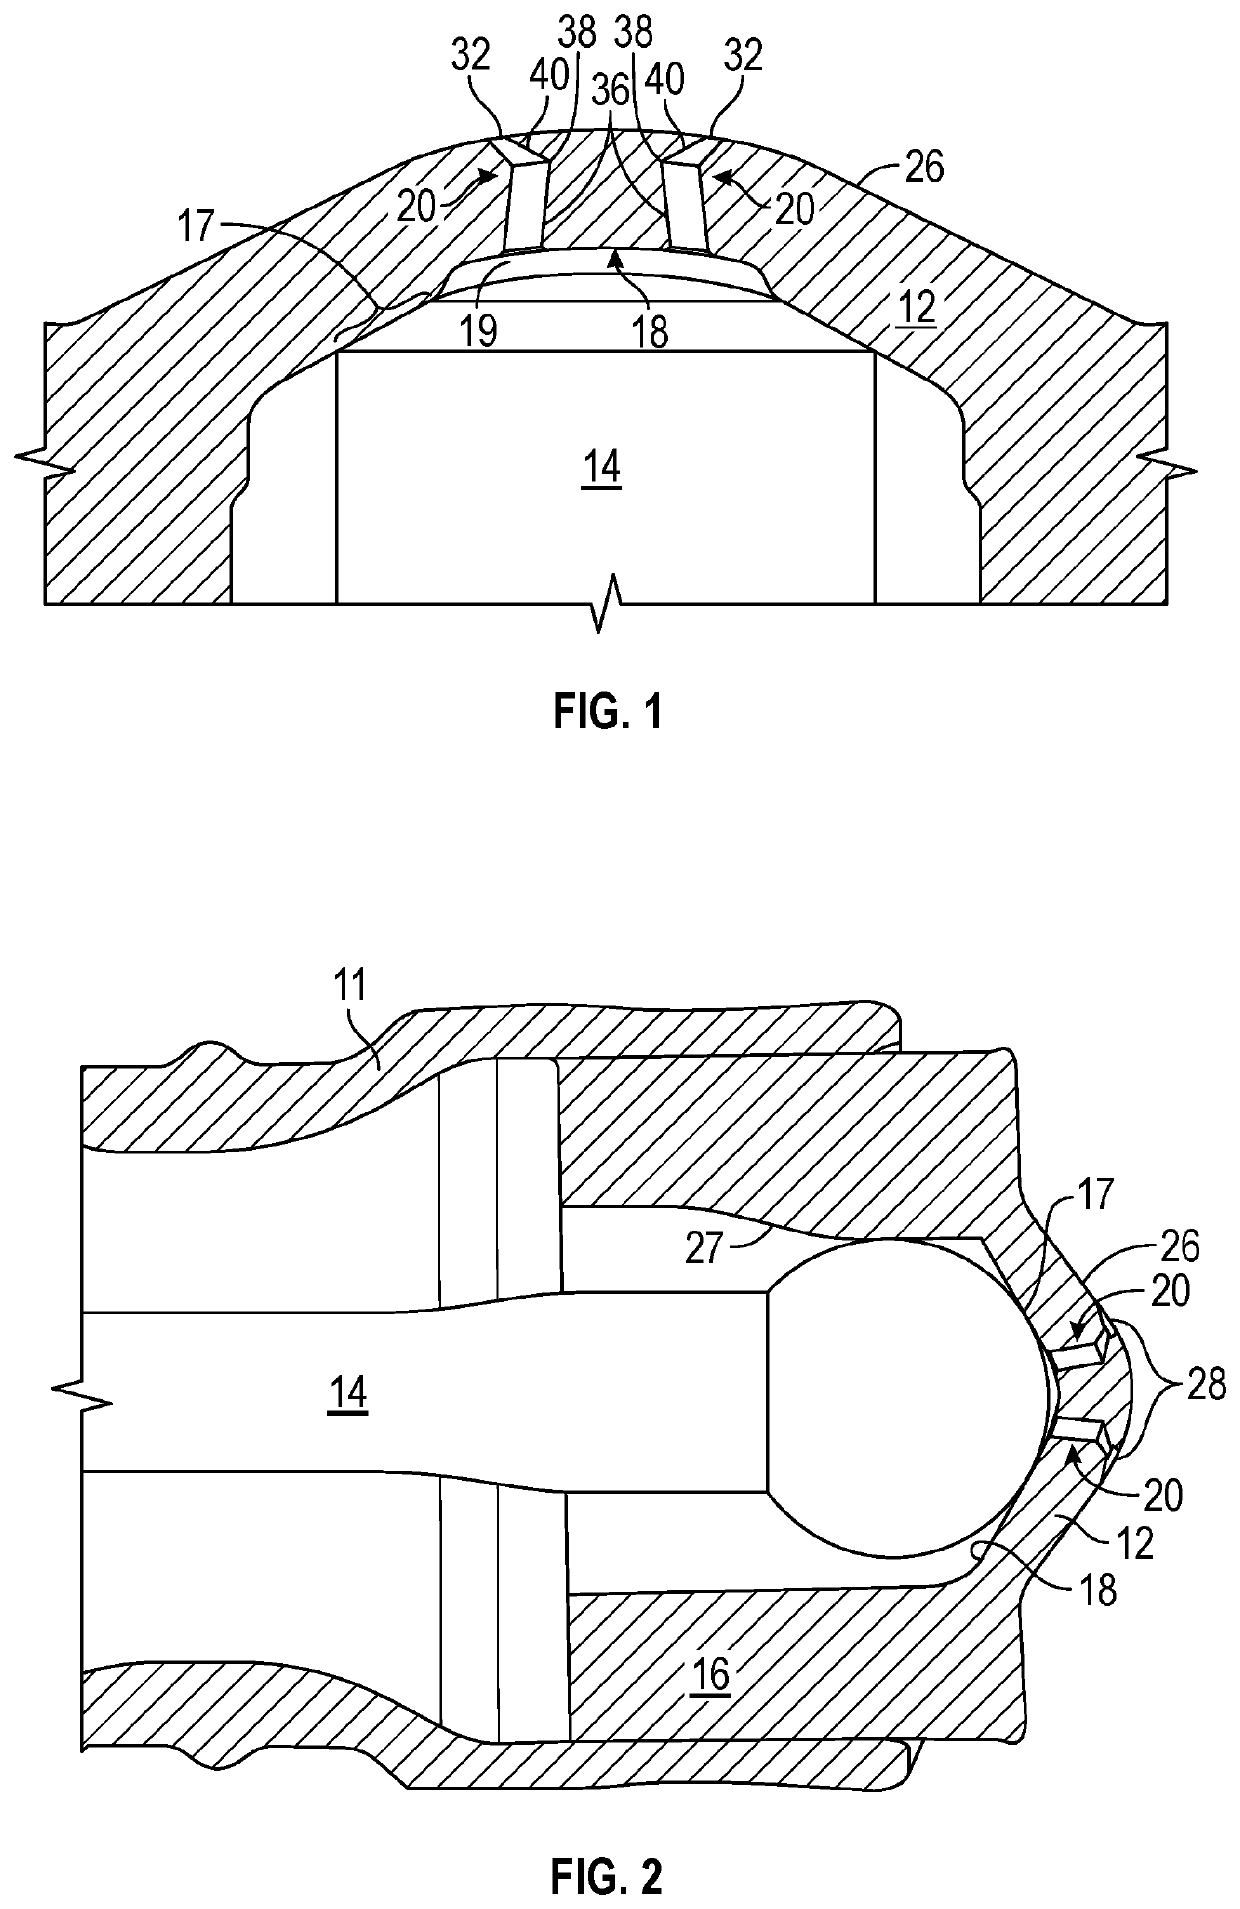 Nozzle with microstructured through-holes